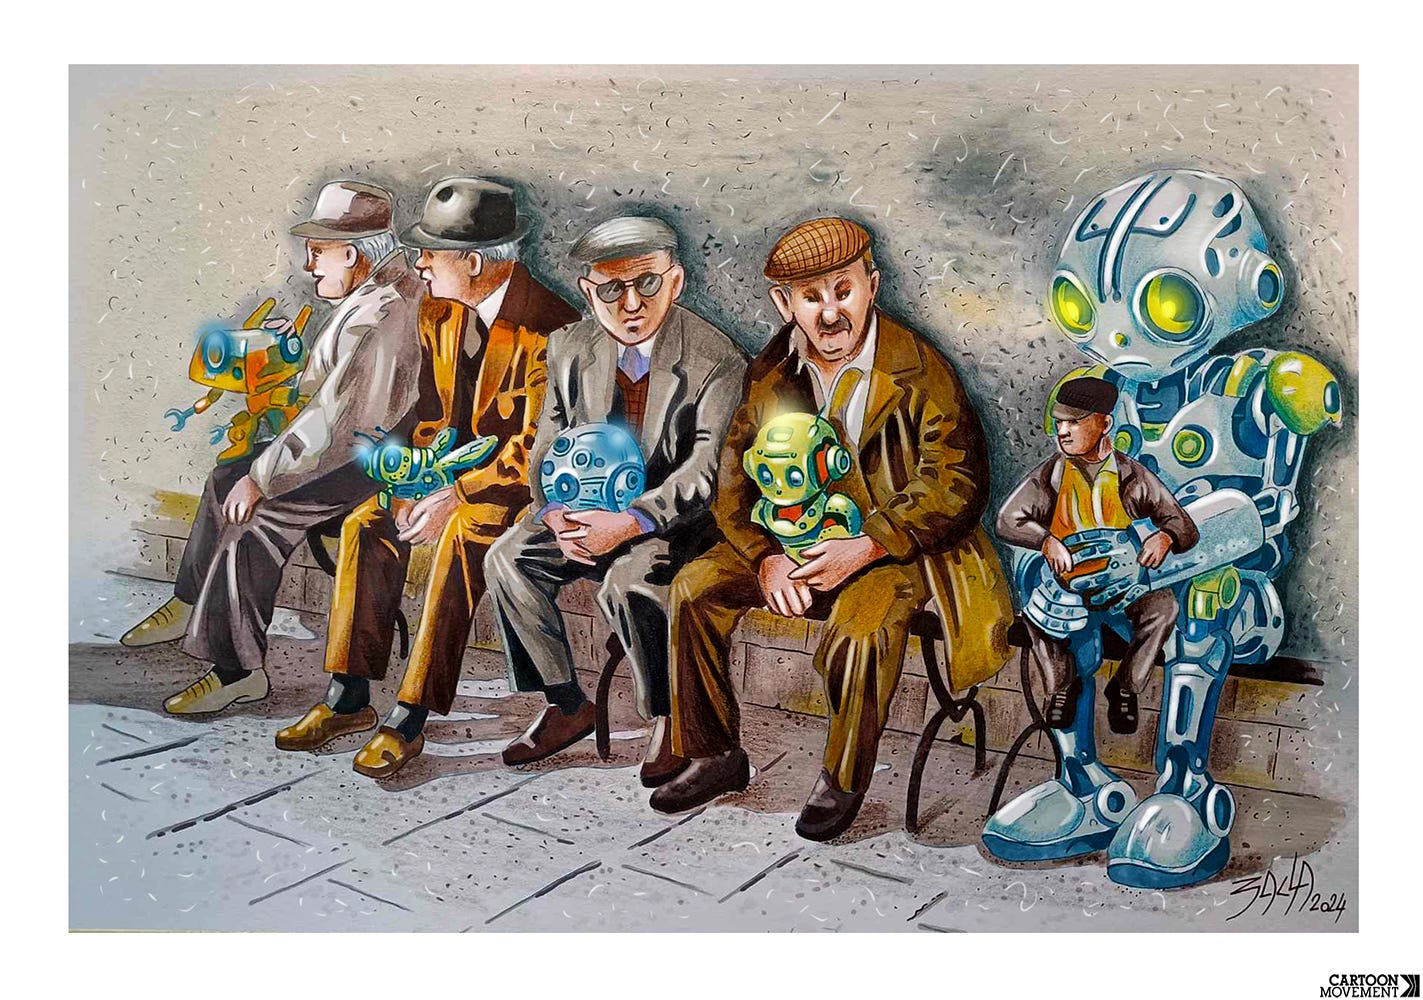 Cartoon showing a row of men waiting at the invention office, holding a robot in their lap. The last in line is not a man, but a robot, holding a small human in its lap.